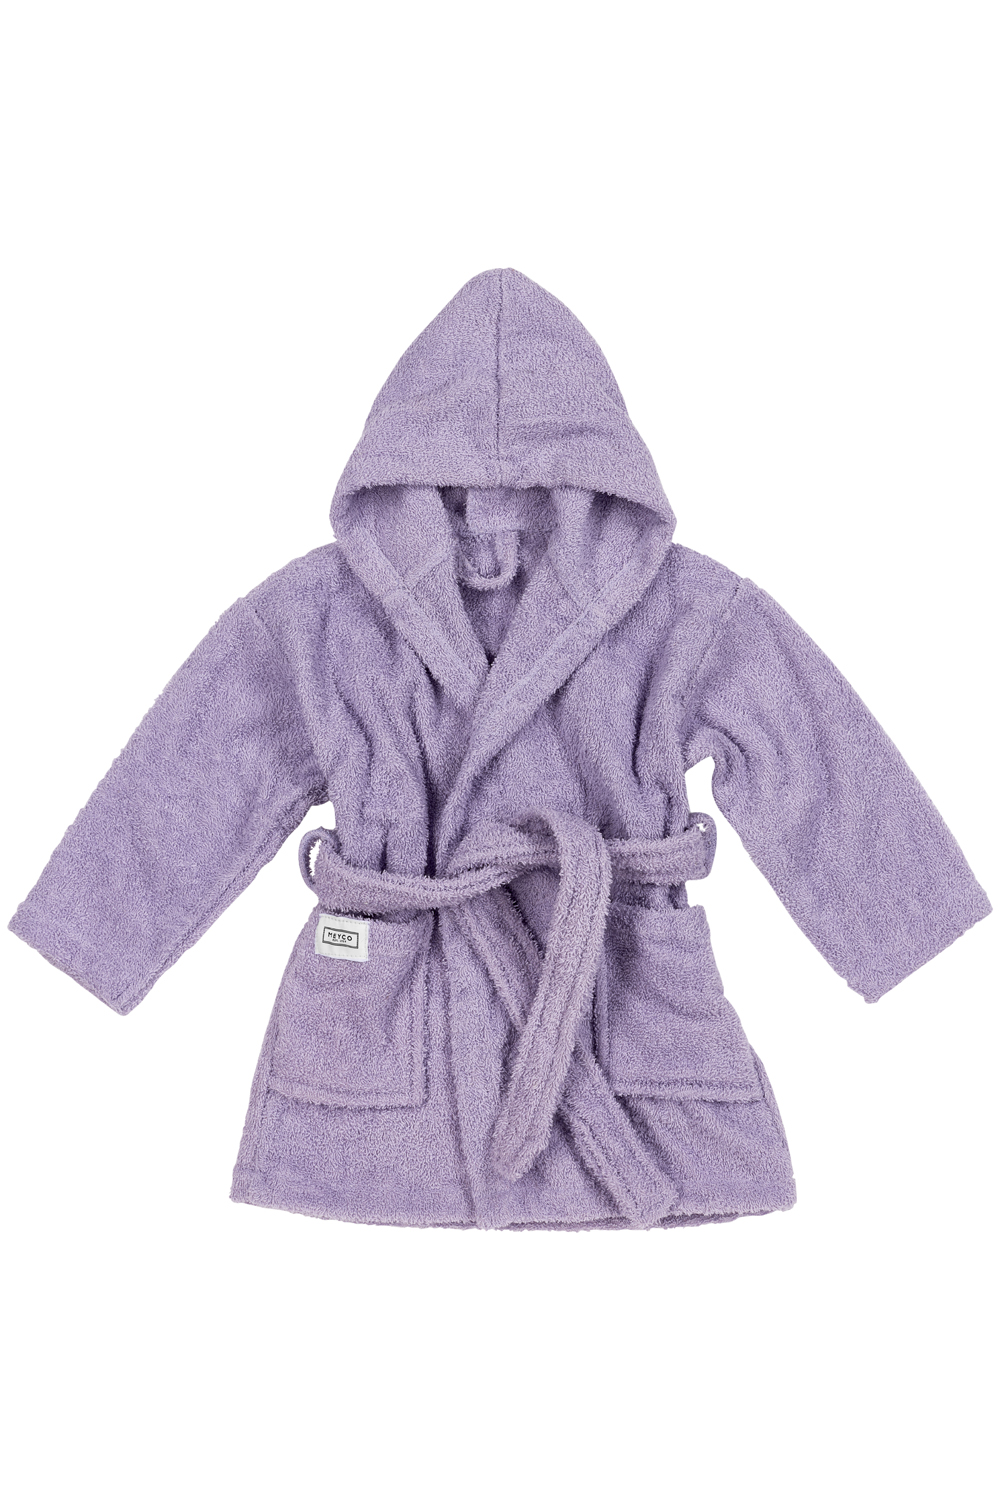 Bademantel Frottee - Soft Lilac - 86/92